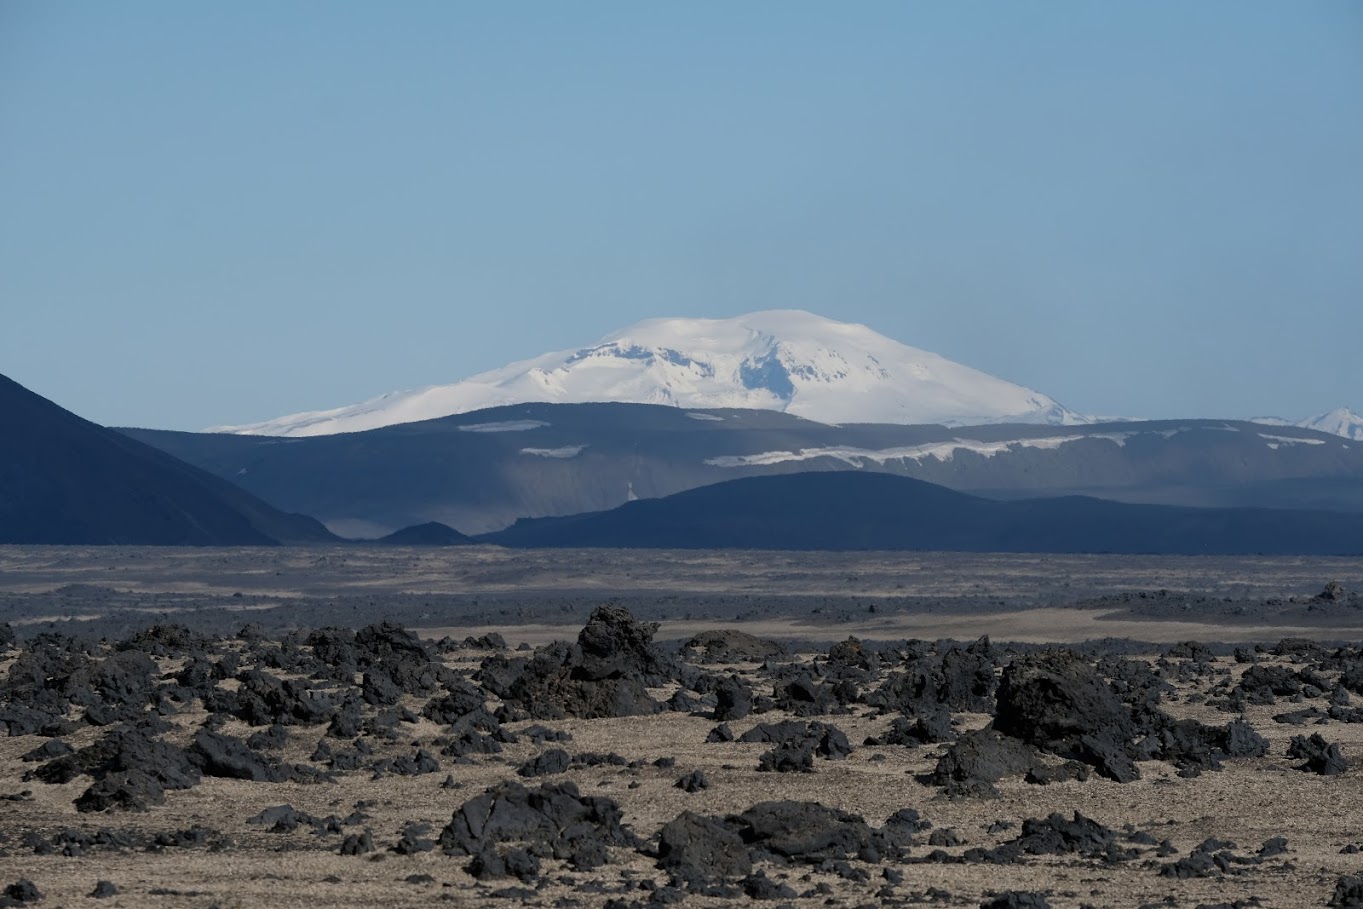 A snowy mountain in the distance, with rocky volcanic terrain in front